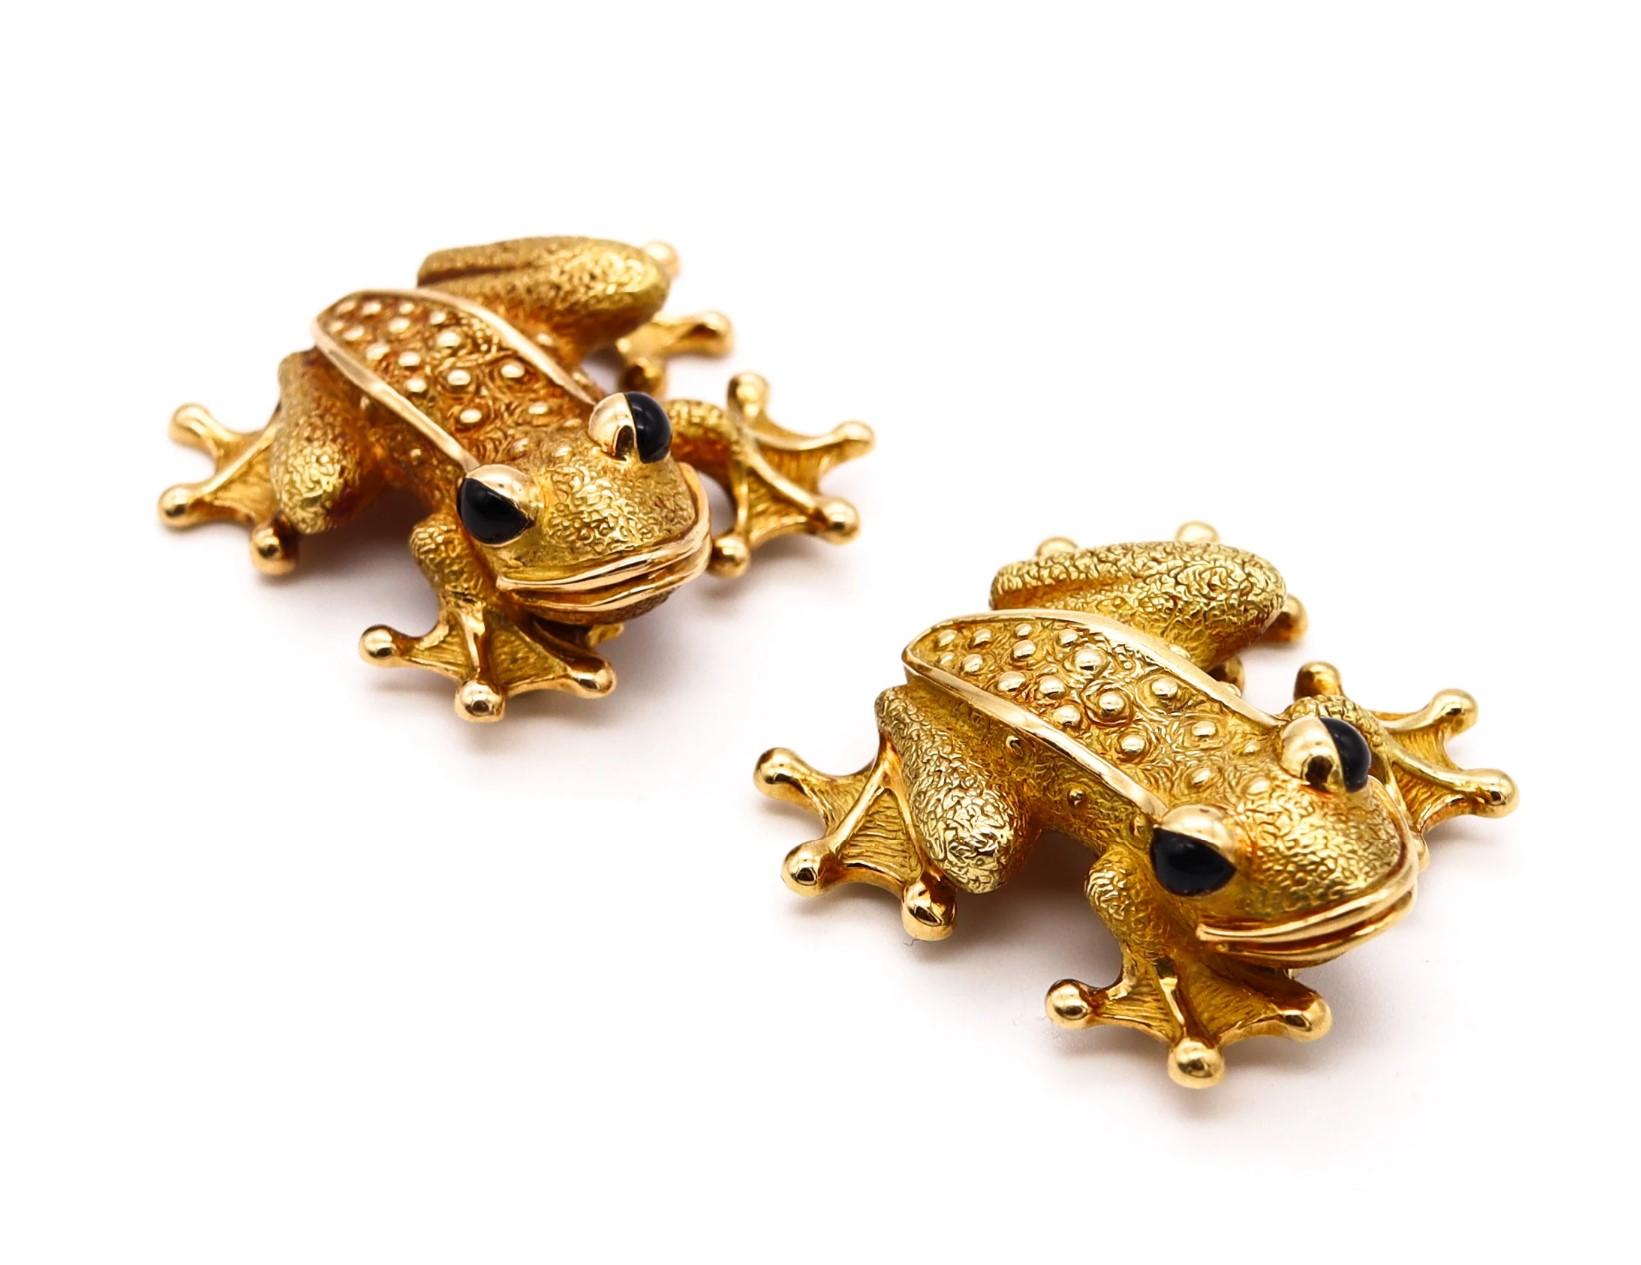 Suite of Frogs brooches designed by Chanel.

An extremely rare and highly collectable vintage pair of pieces. These tree frog's with webbed feet brooches, were created in Paris France by the fashion house of Chanel back in the 1970's. Both are